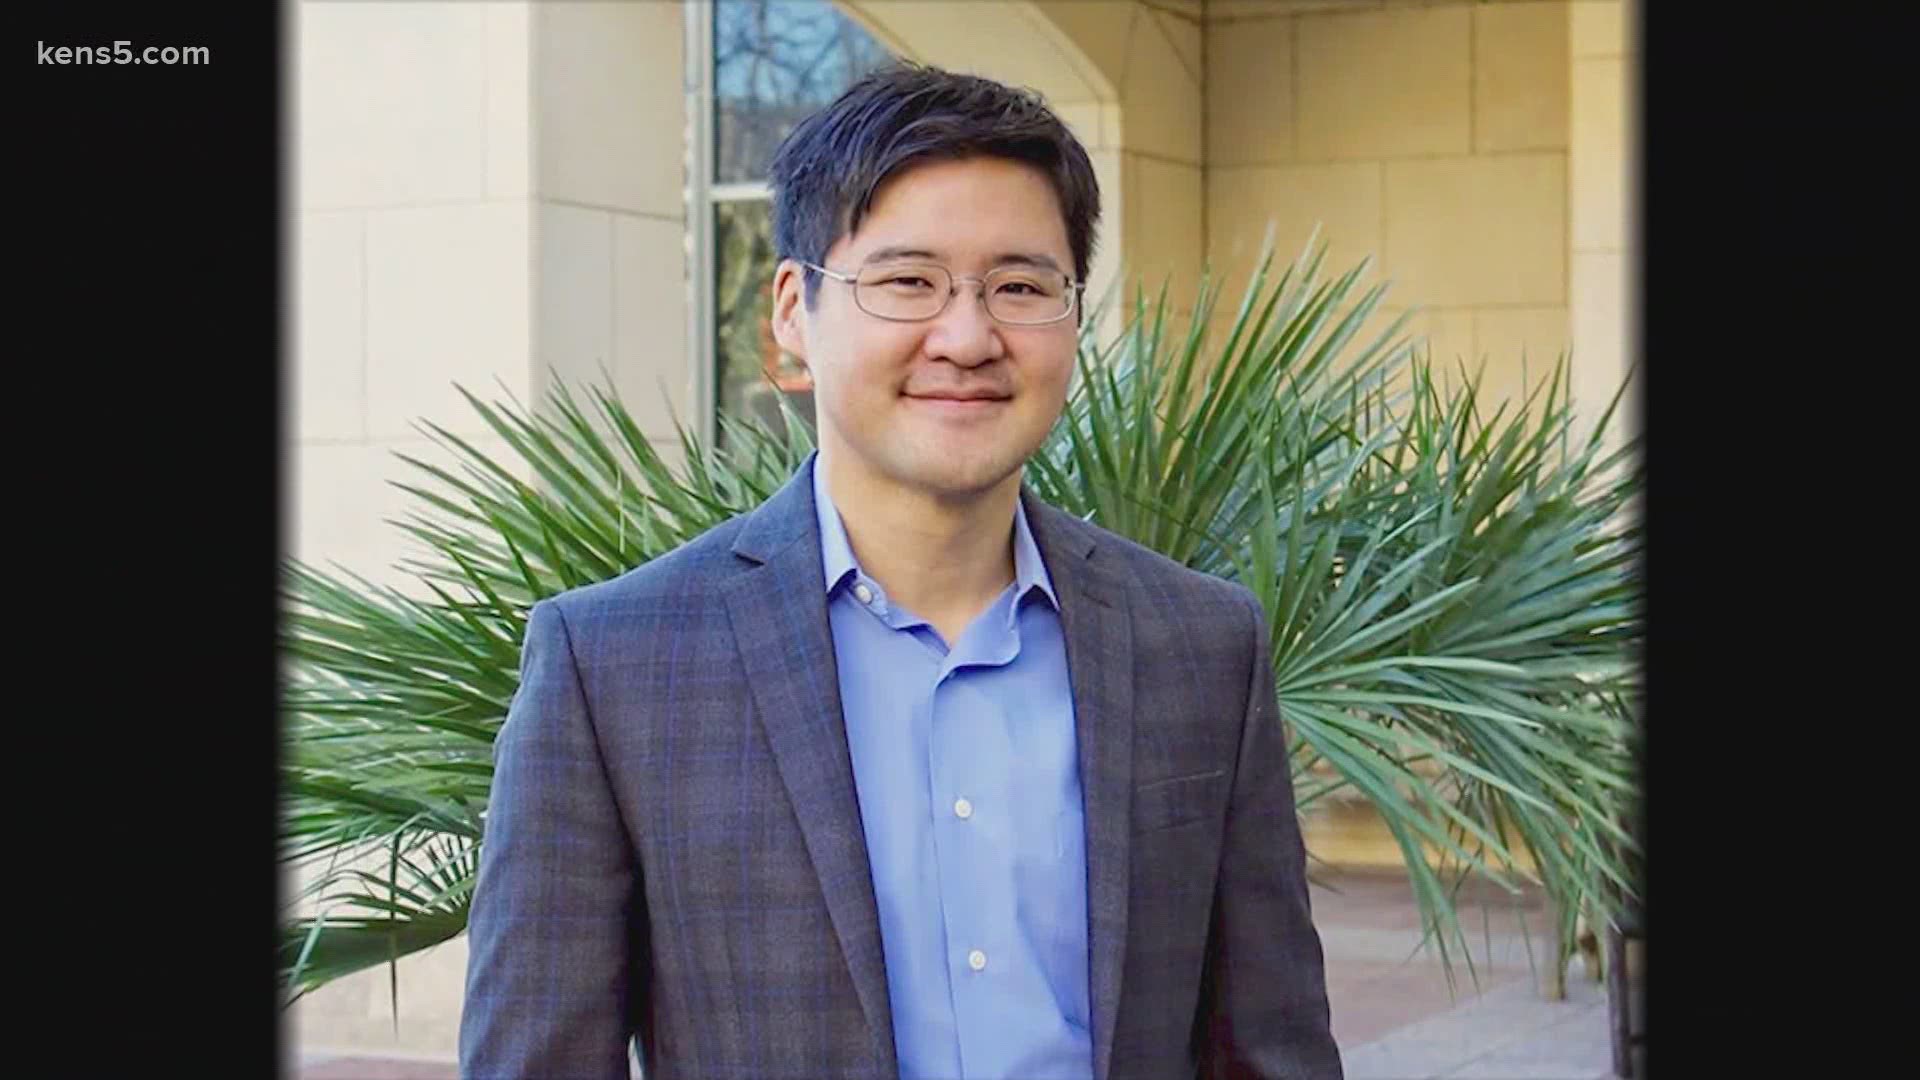 Francis Yoshimoto, while appreciative of the recognition, is more focused on how his research will continue to impact the lives of those fighting the virus.